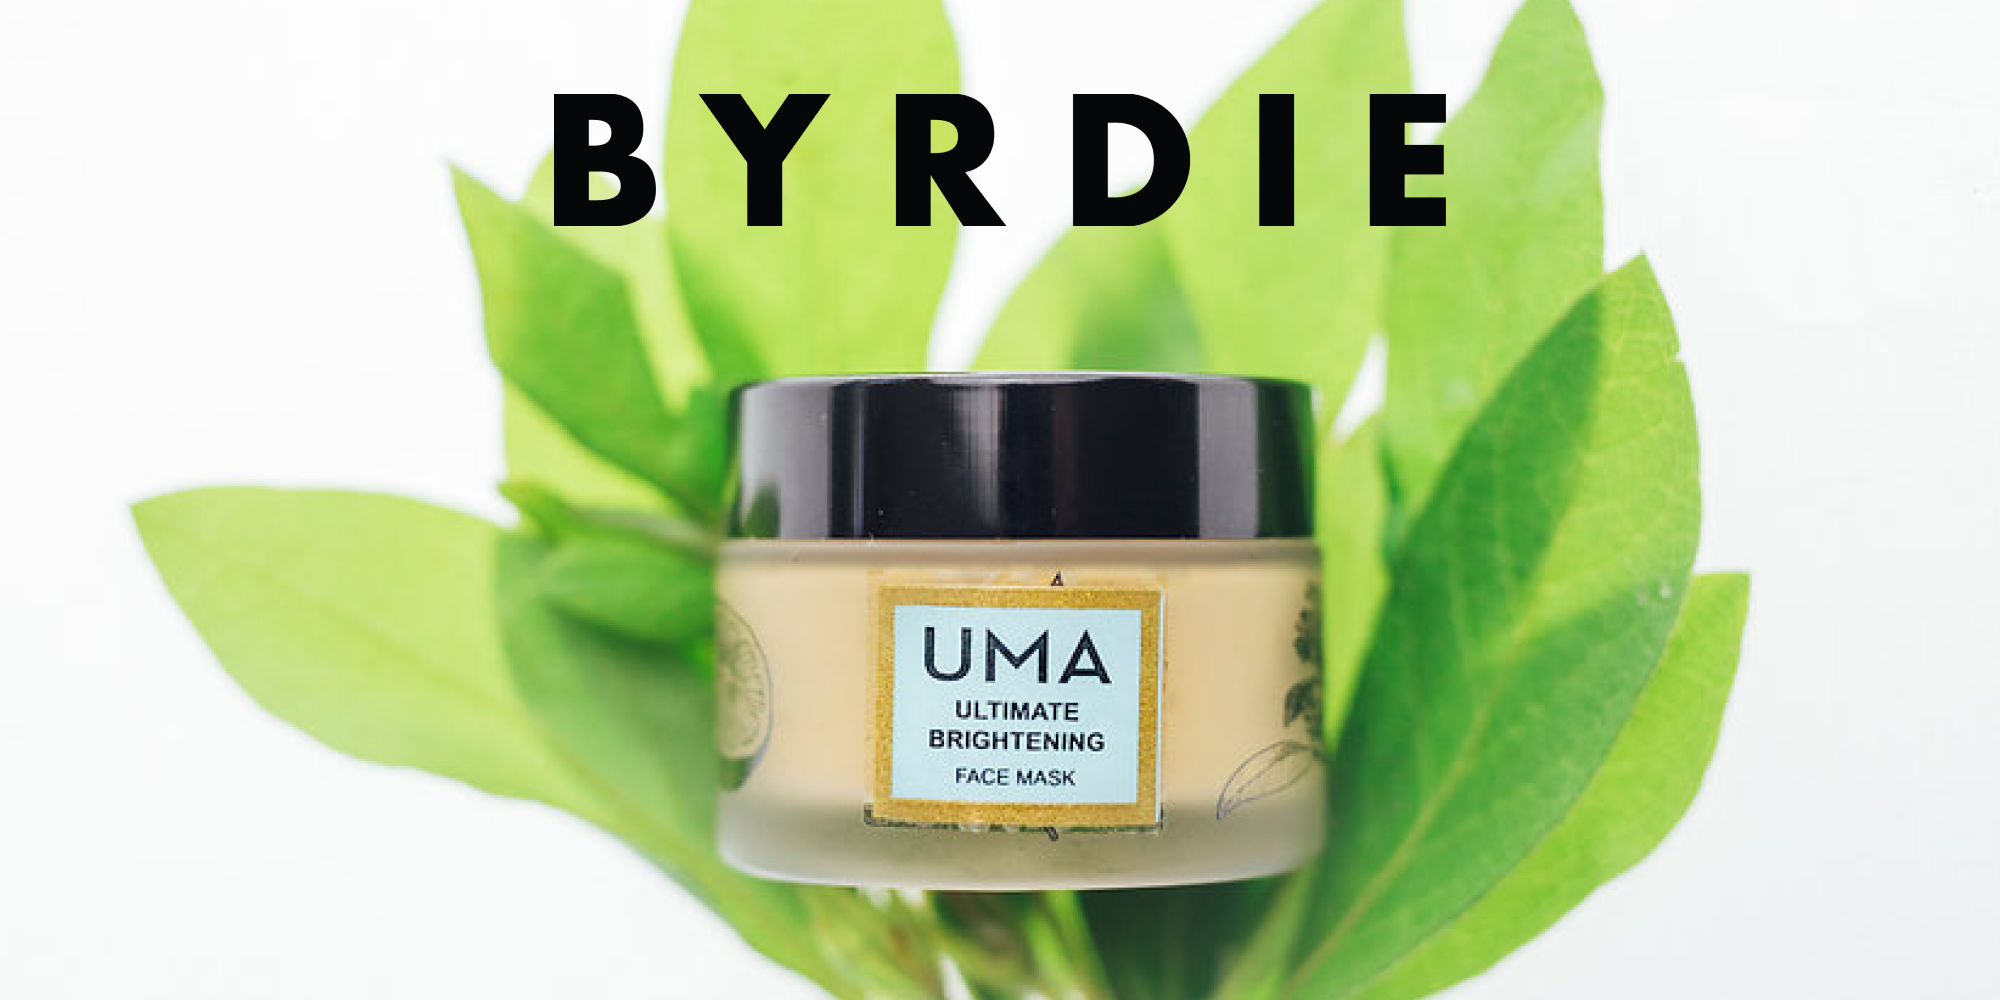 Byrdie: The Best Product With Saffron